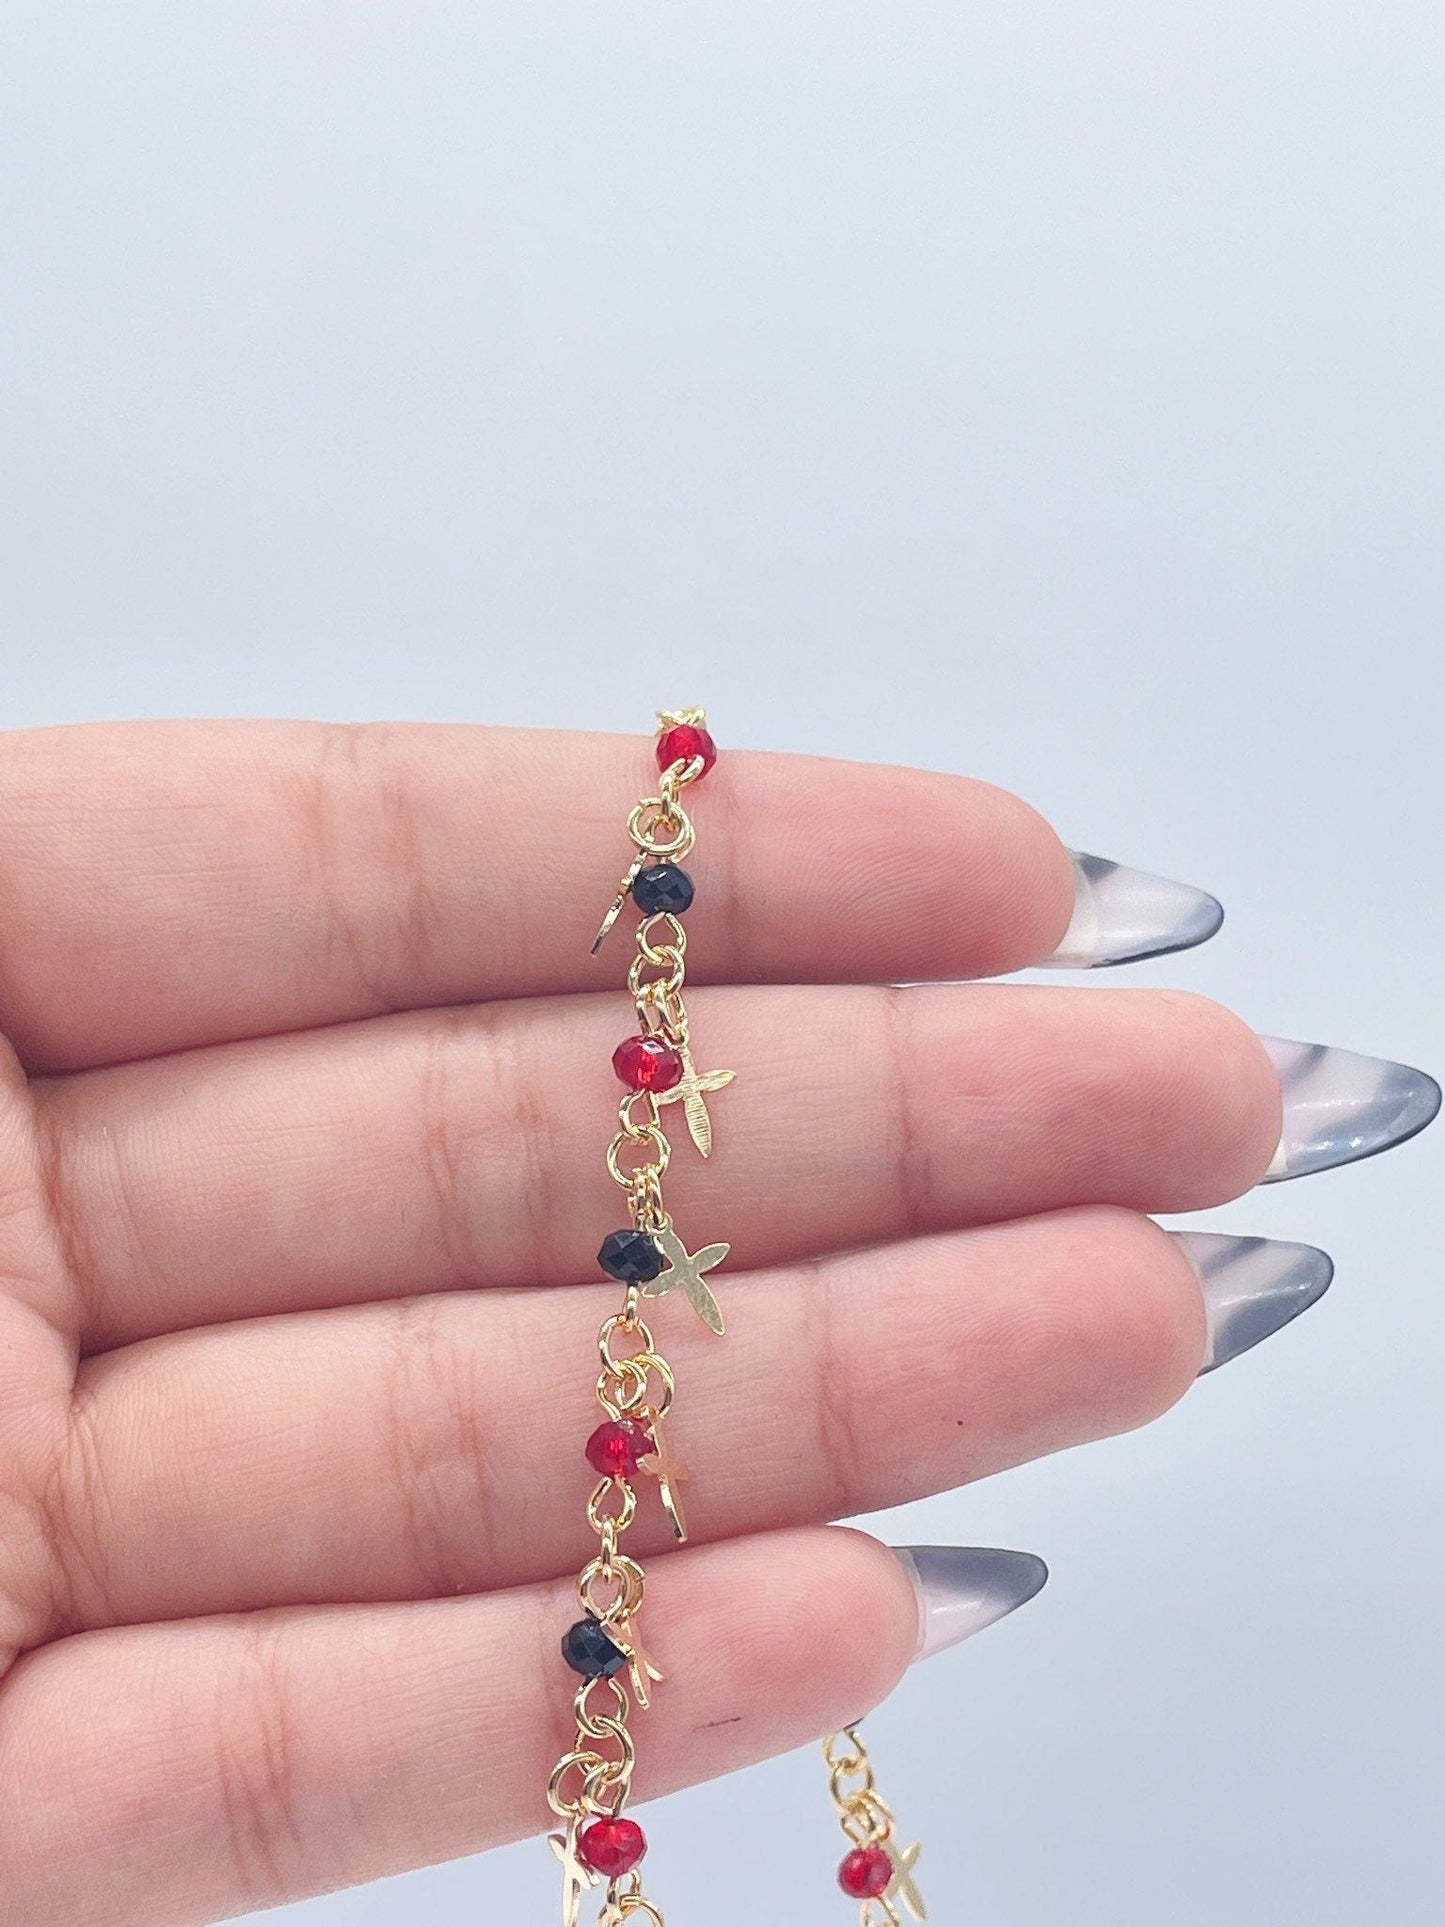 18k Gold Layered Red and Black Bead Charm Anklet Bracelet Featuring 17 Tiny